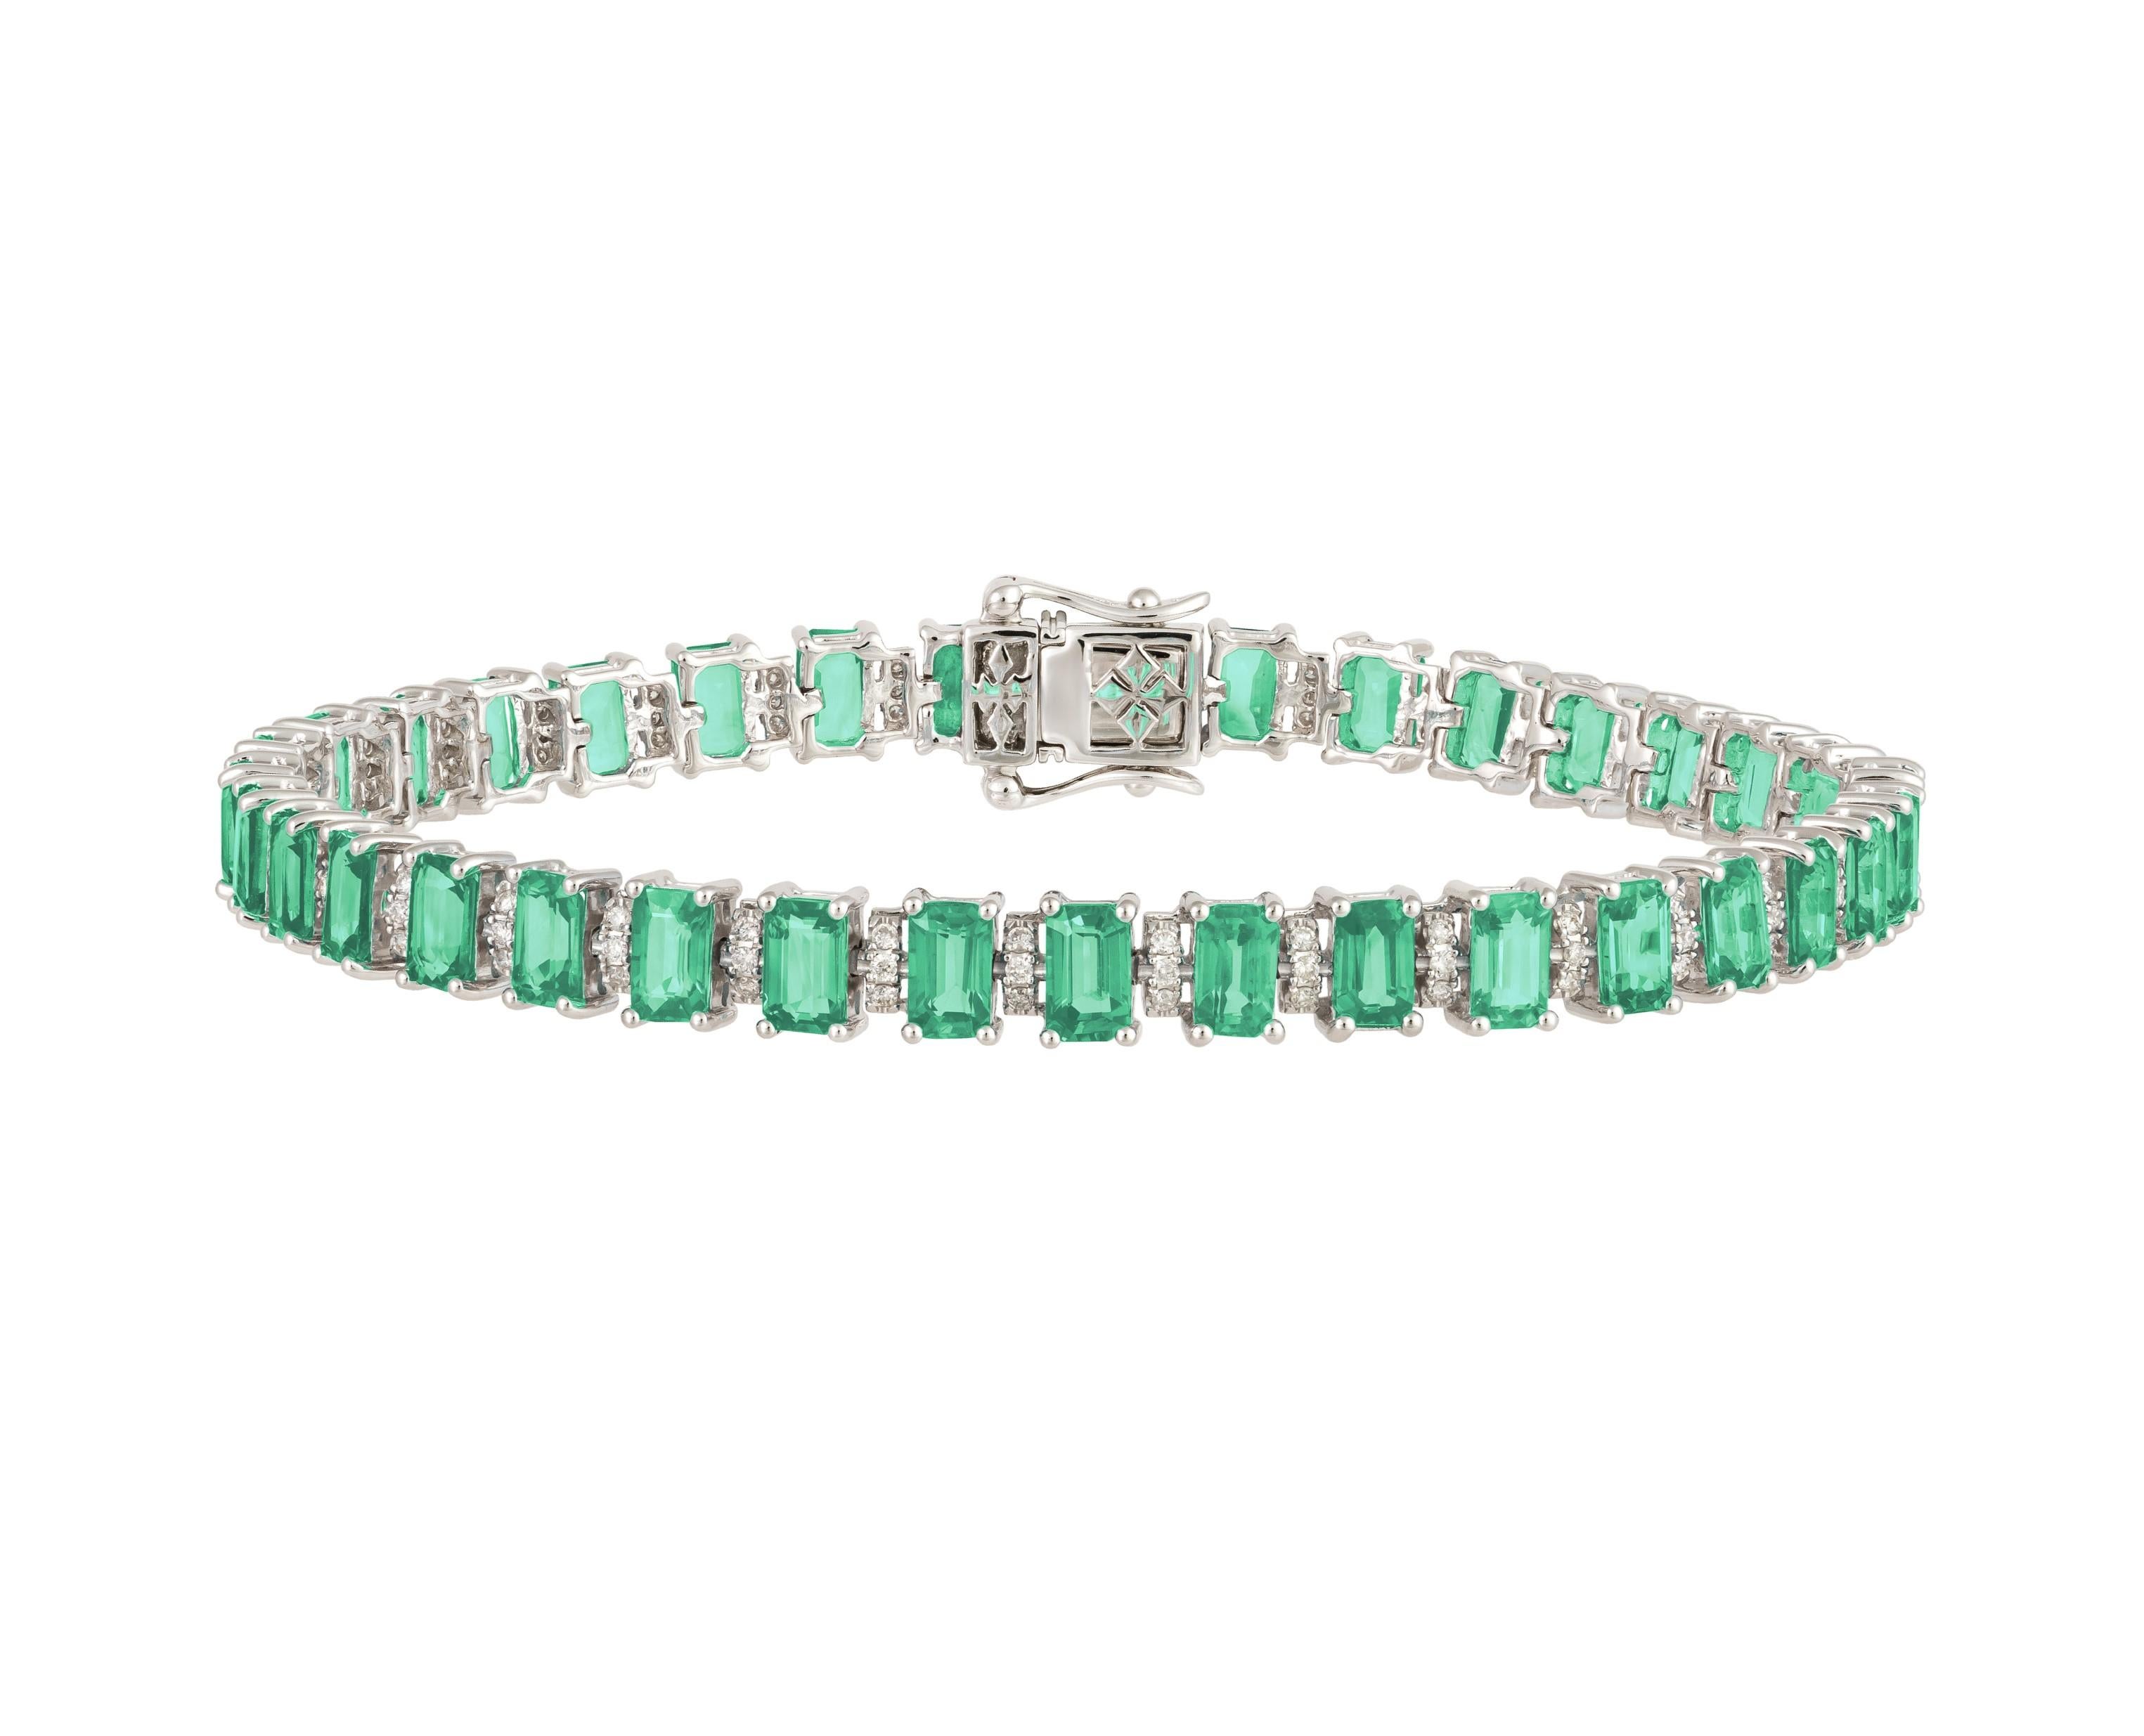 The Following Item we are offering is this Rare Important Radiant 18KT Gold Gorgeous Glittering and Sparkling Magnificent Fancy Shaped Tapered Baguette Green Emerald and Round Diamond Bracelet. Bracelet Contains over 10CTS of Beautiful Fancy Emerald